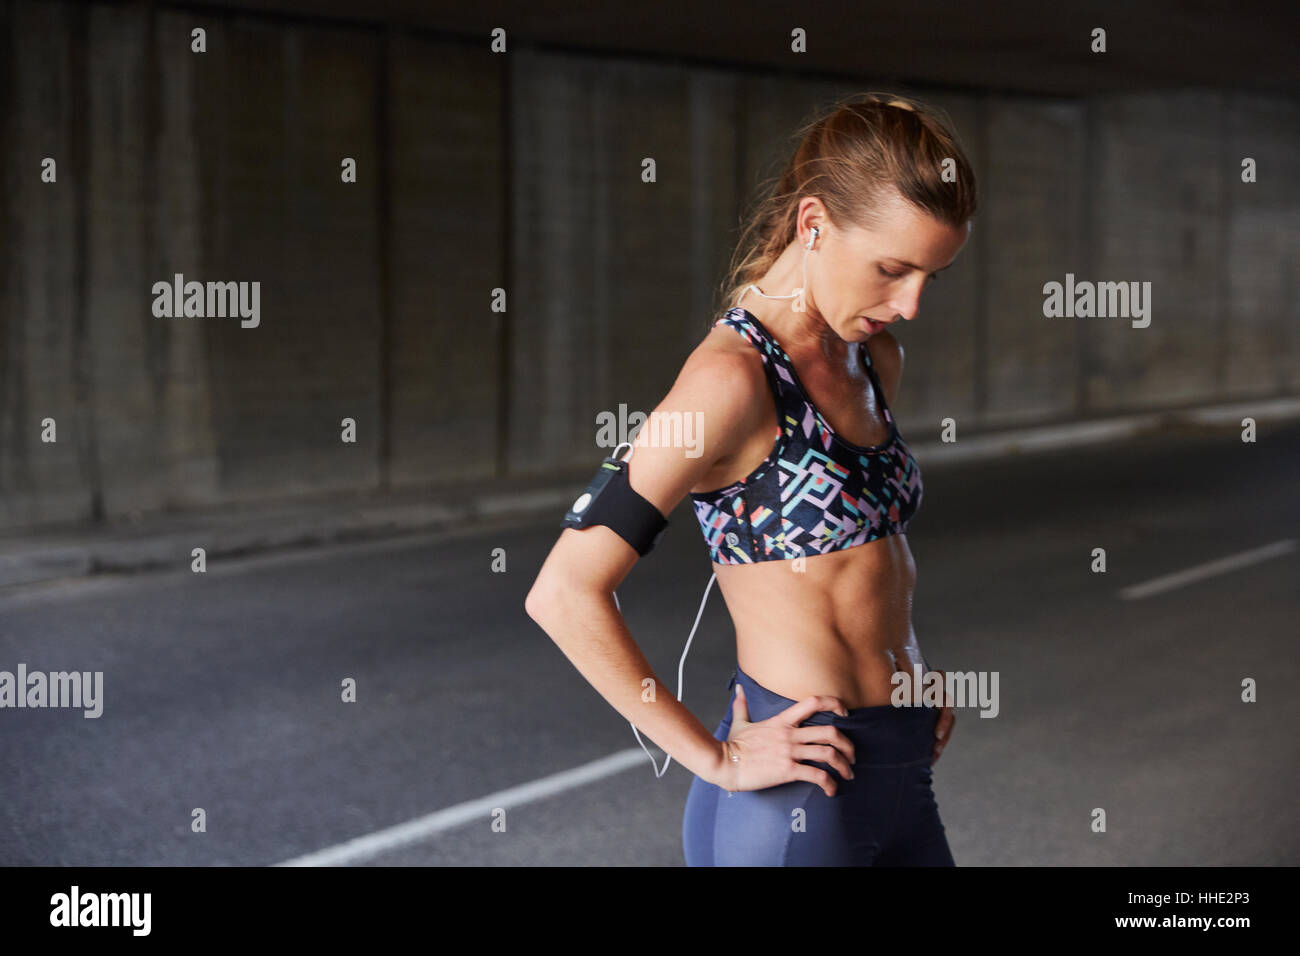 Fit female runner in sports bra with mp3 player armband and headphones resting in urban tunnel Stock Photo